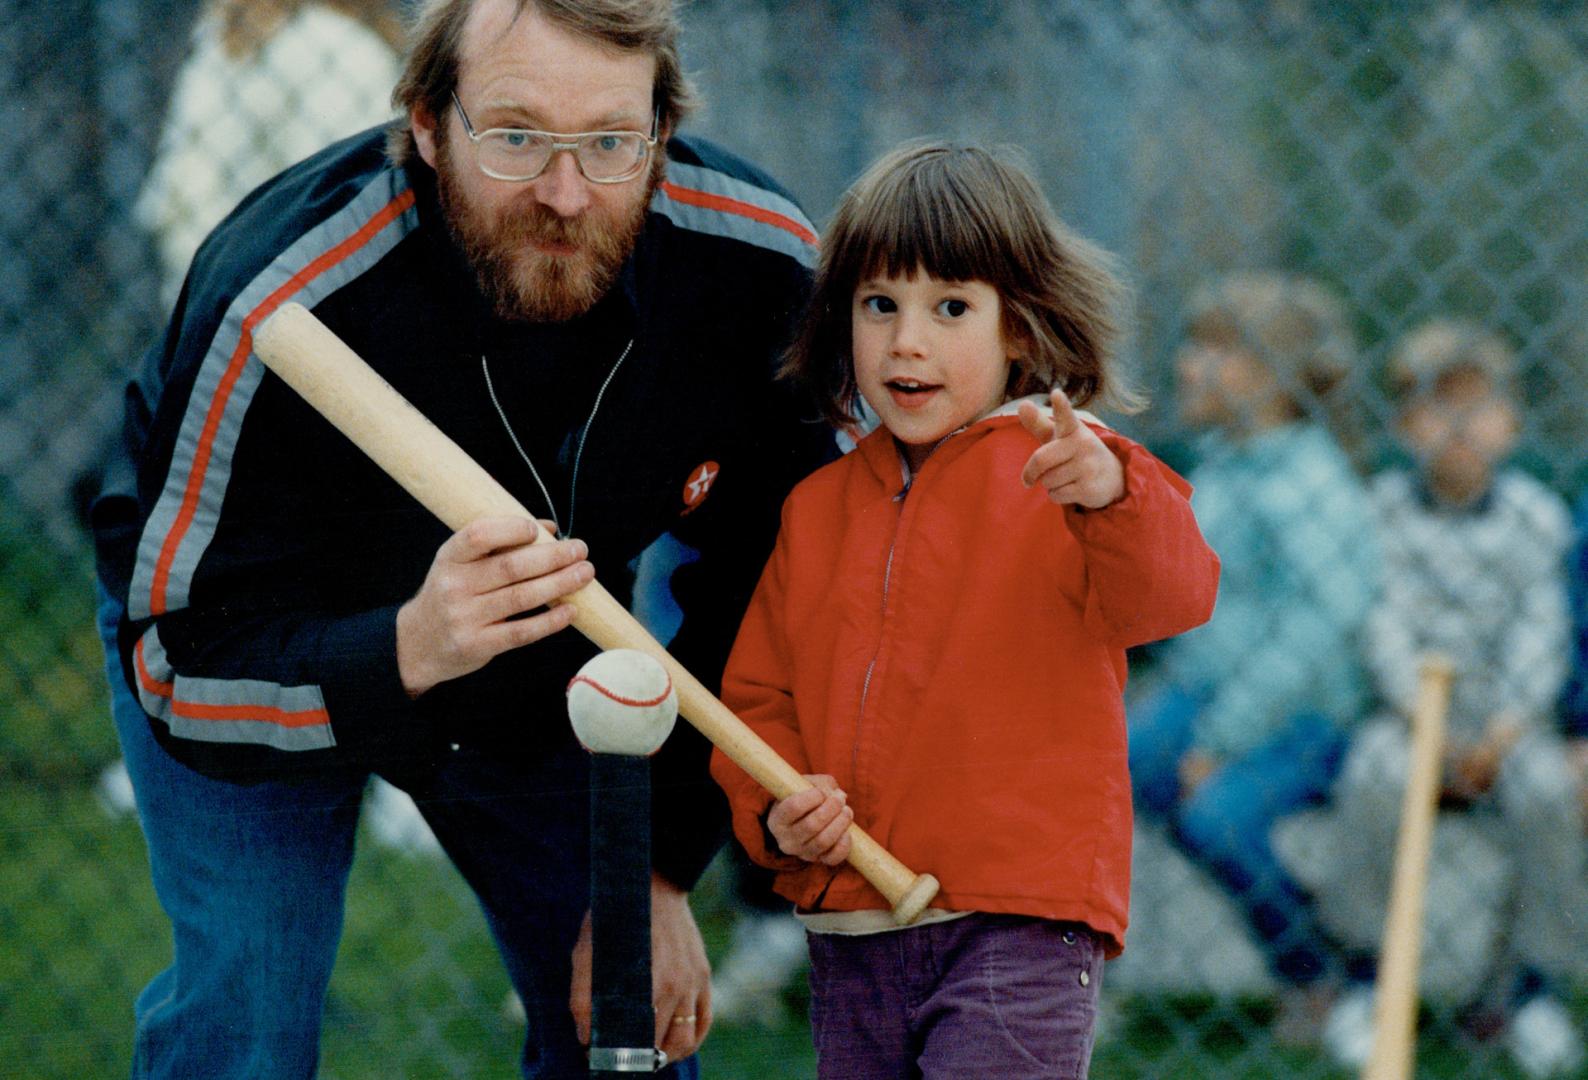 Getting into the swing of things in tee-ball at Pape Park, Amy Bippus, 4, gets batting tip from coach John Hodgson (above) while, at left, parent Sue (...)